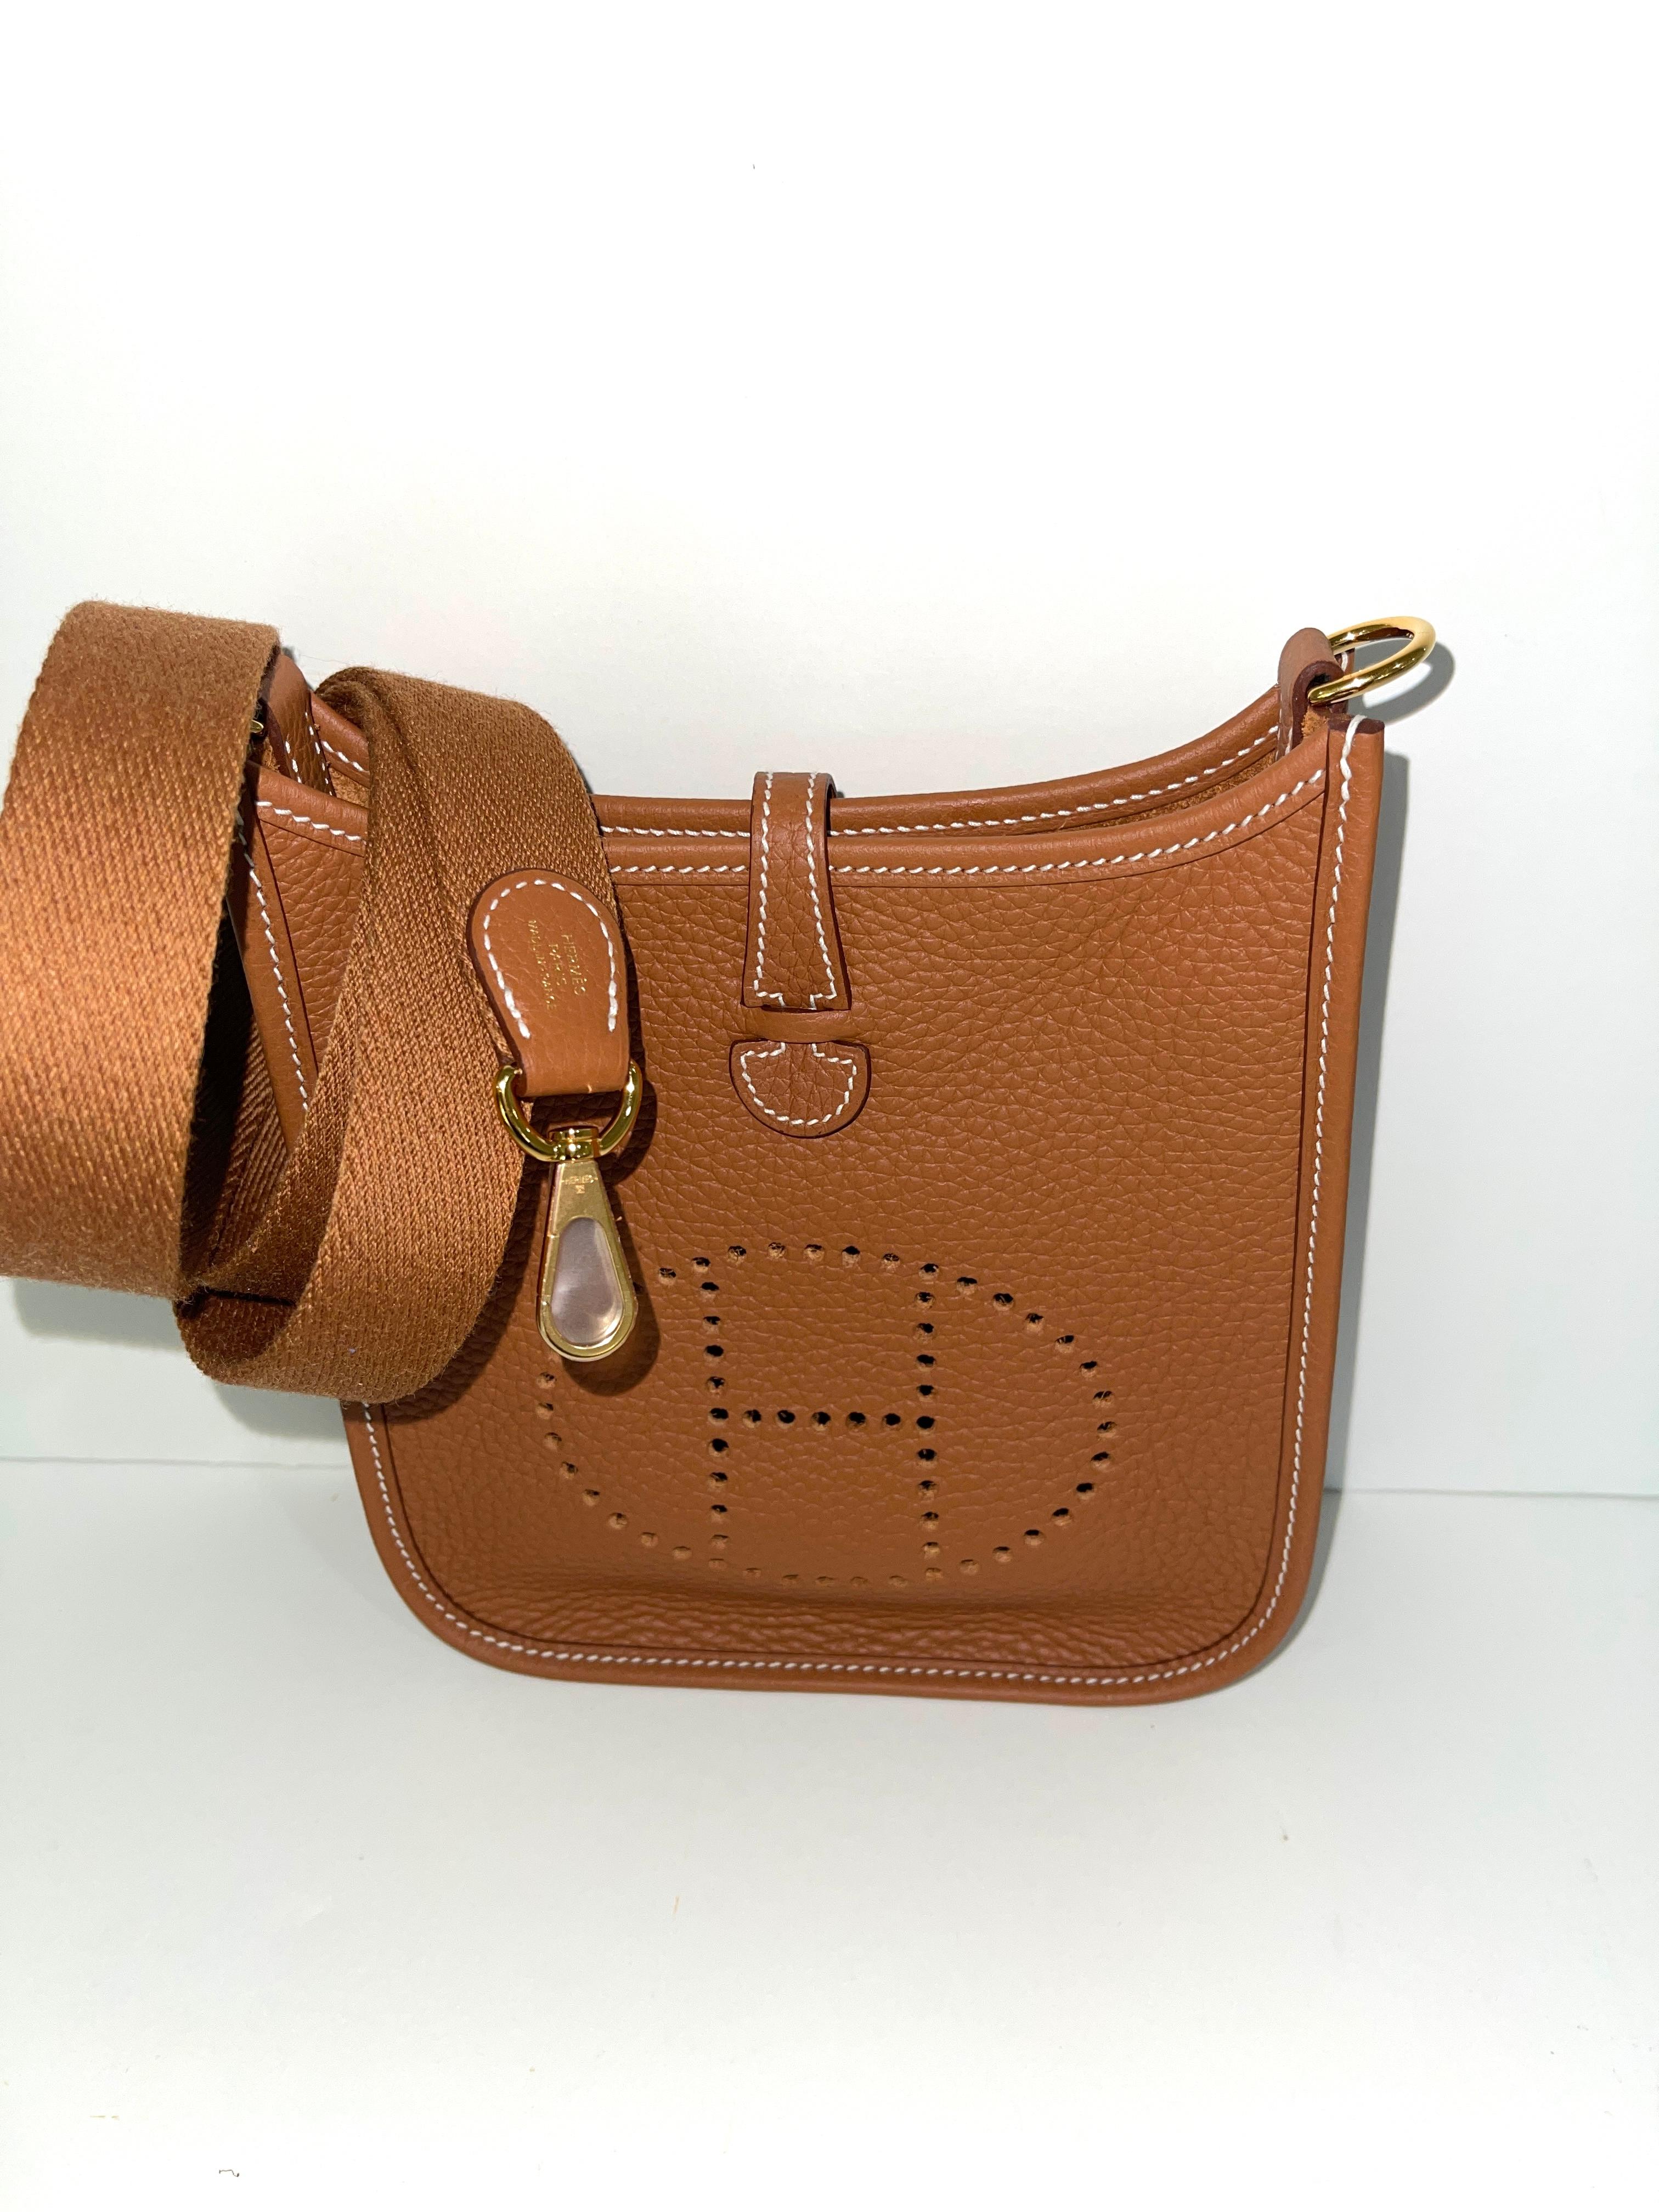 Hermès Evelyne 16 TPM Gold Bag Gold Hardware RARE In New Condition For Sale In West Chester, PA